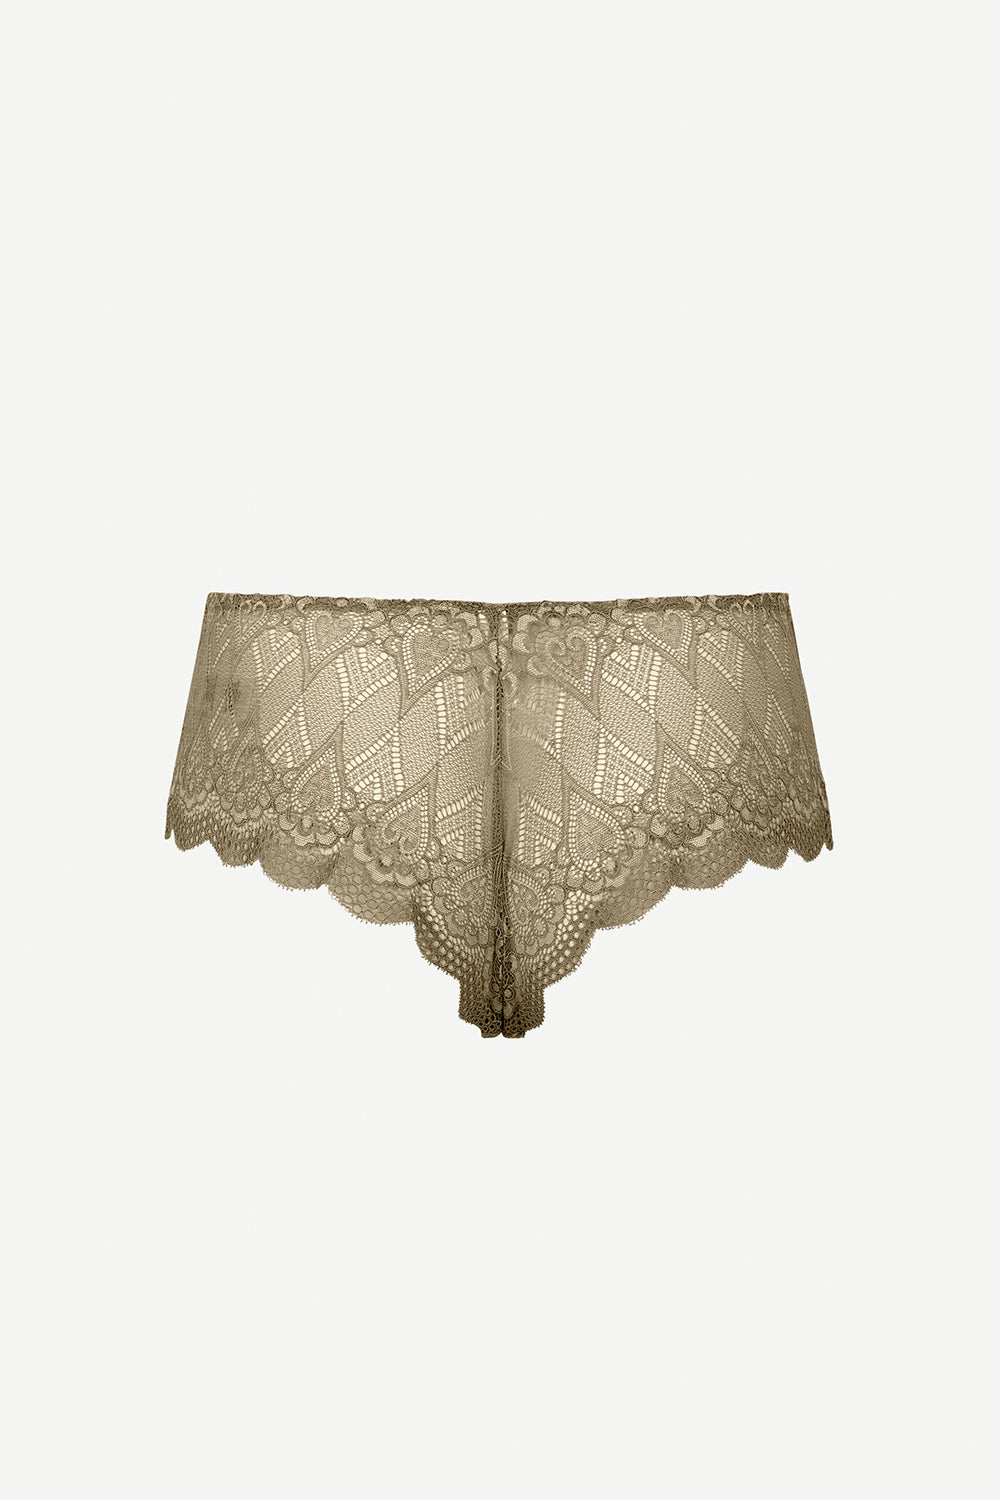 Buy Victoria's Secret Scalloped Lace Hipster Thong Panty from the